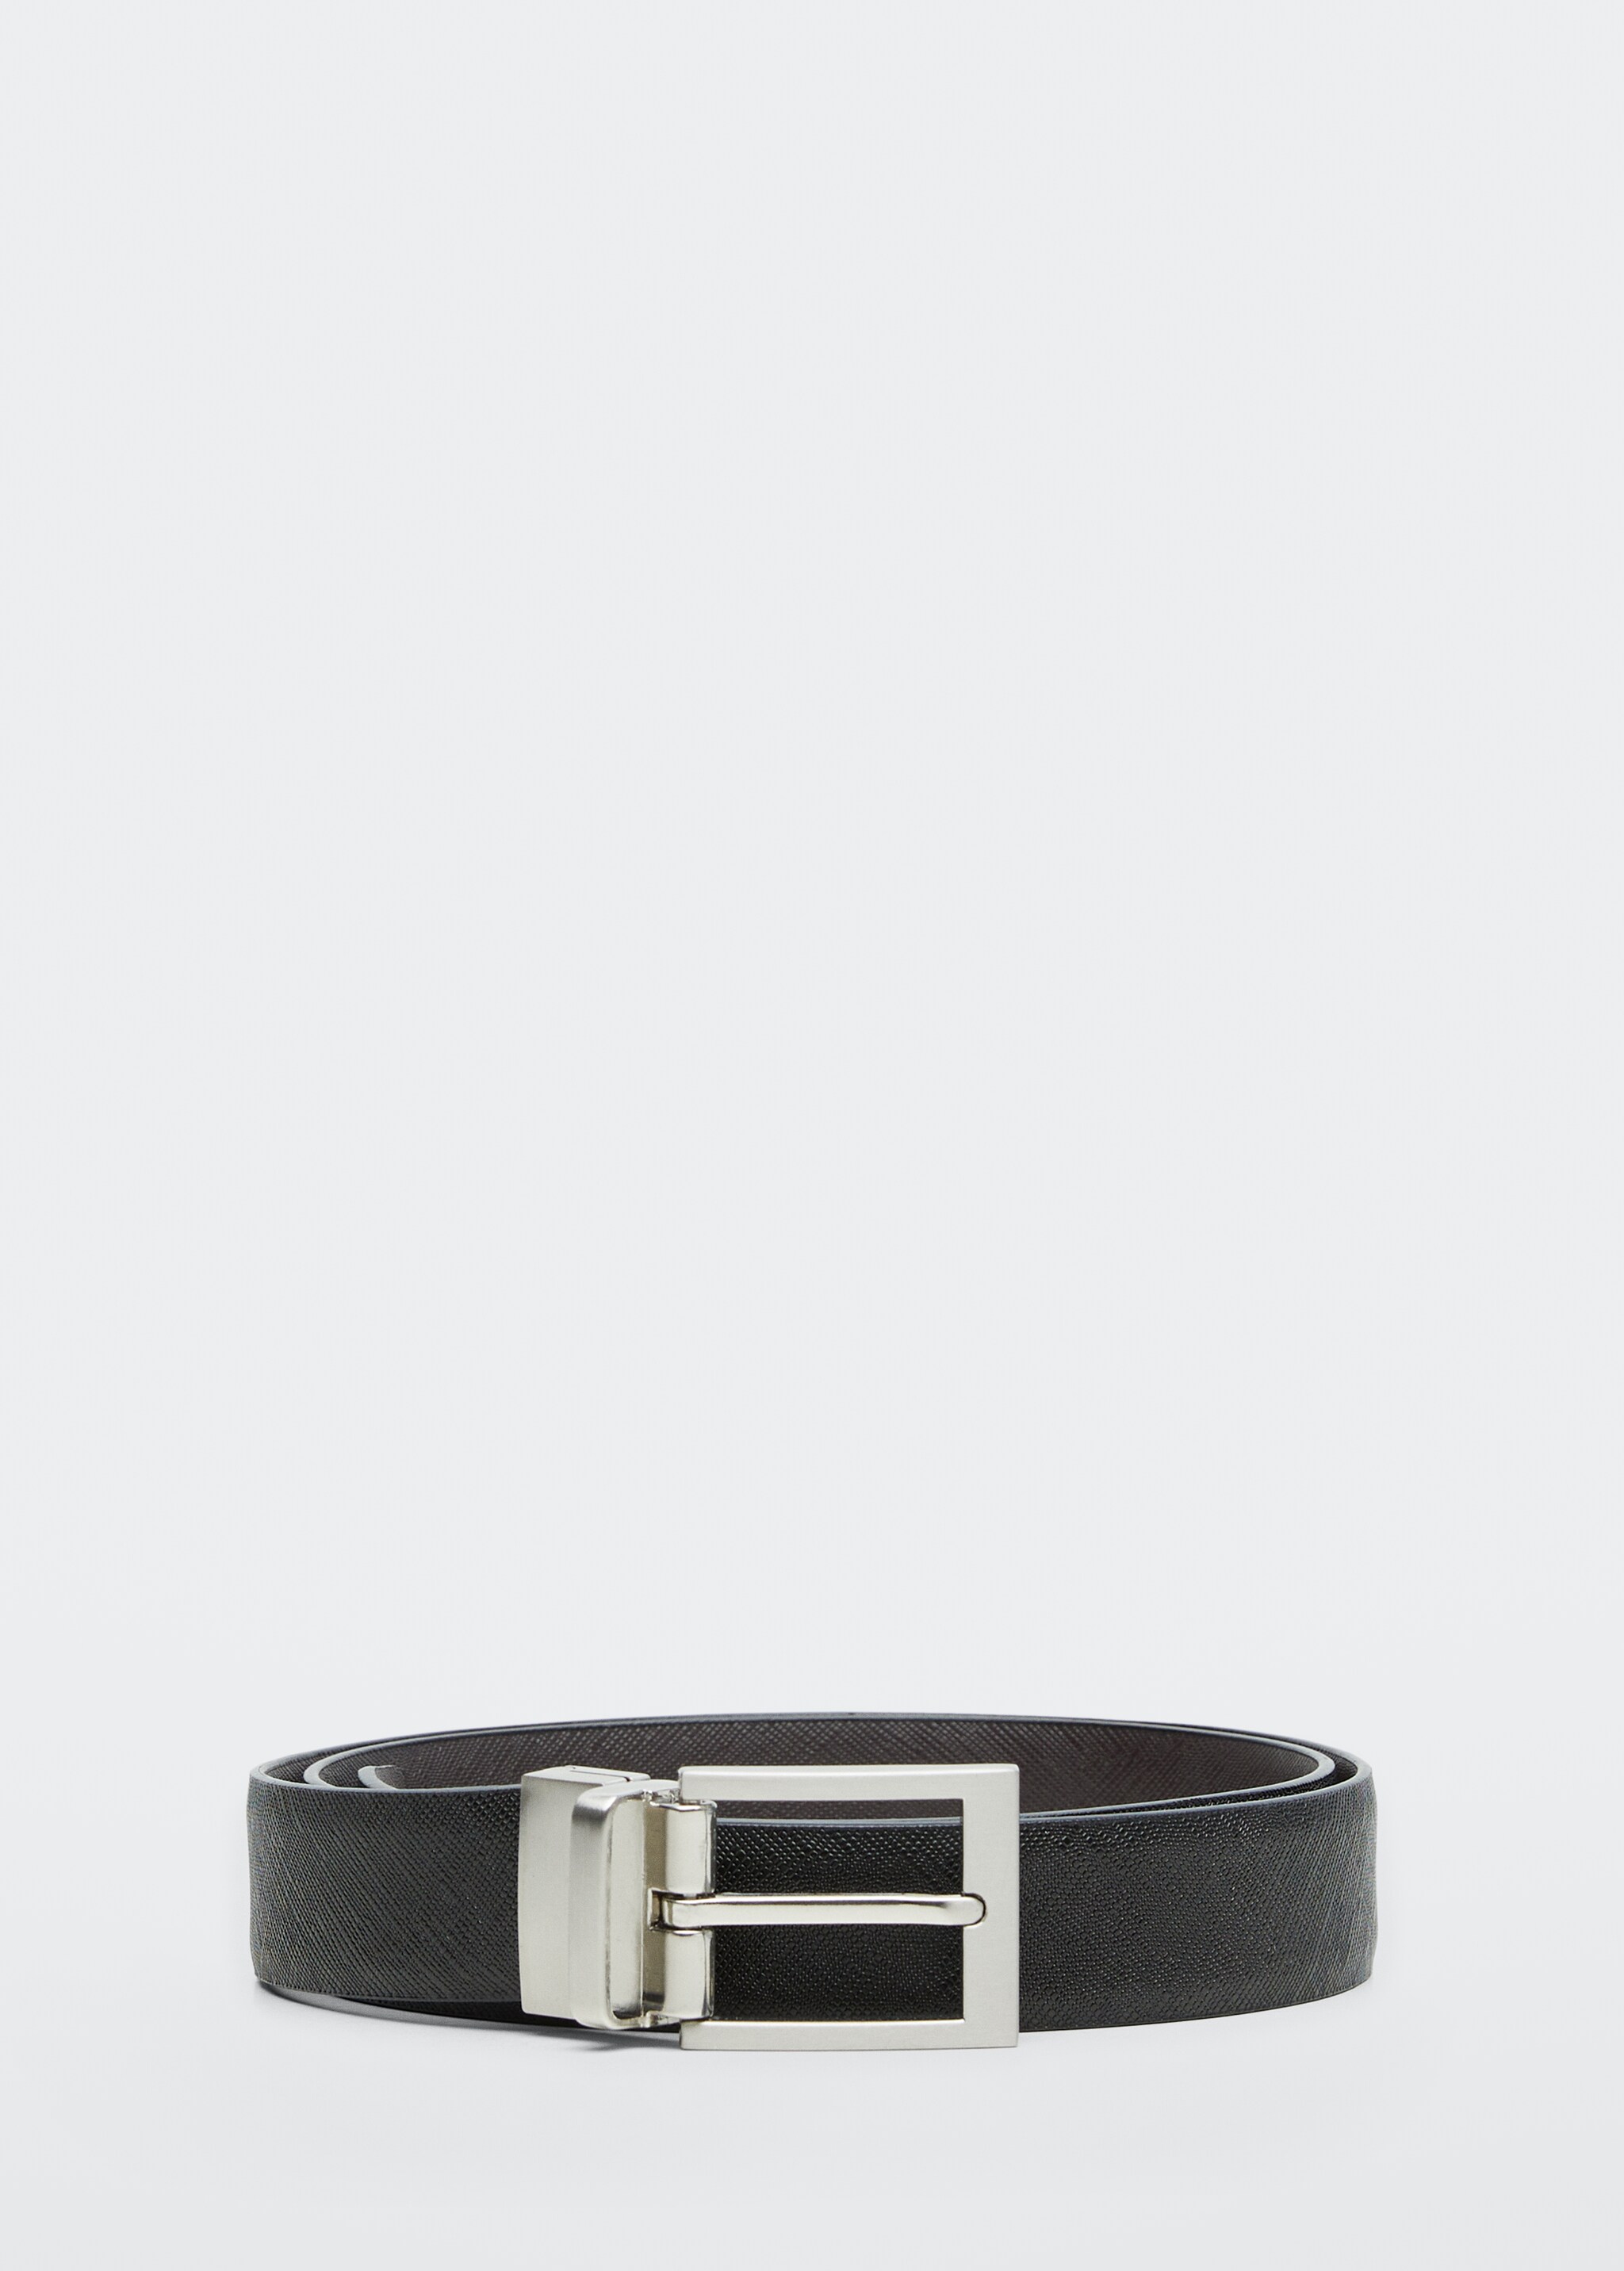 Saffiano leather tailored belt - Article without model